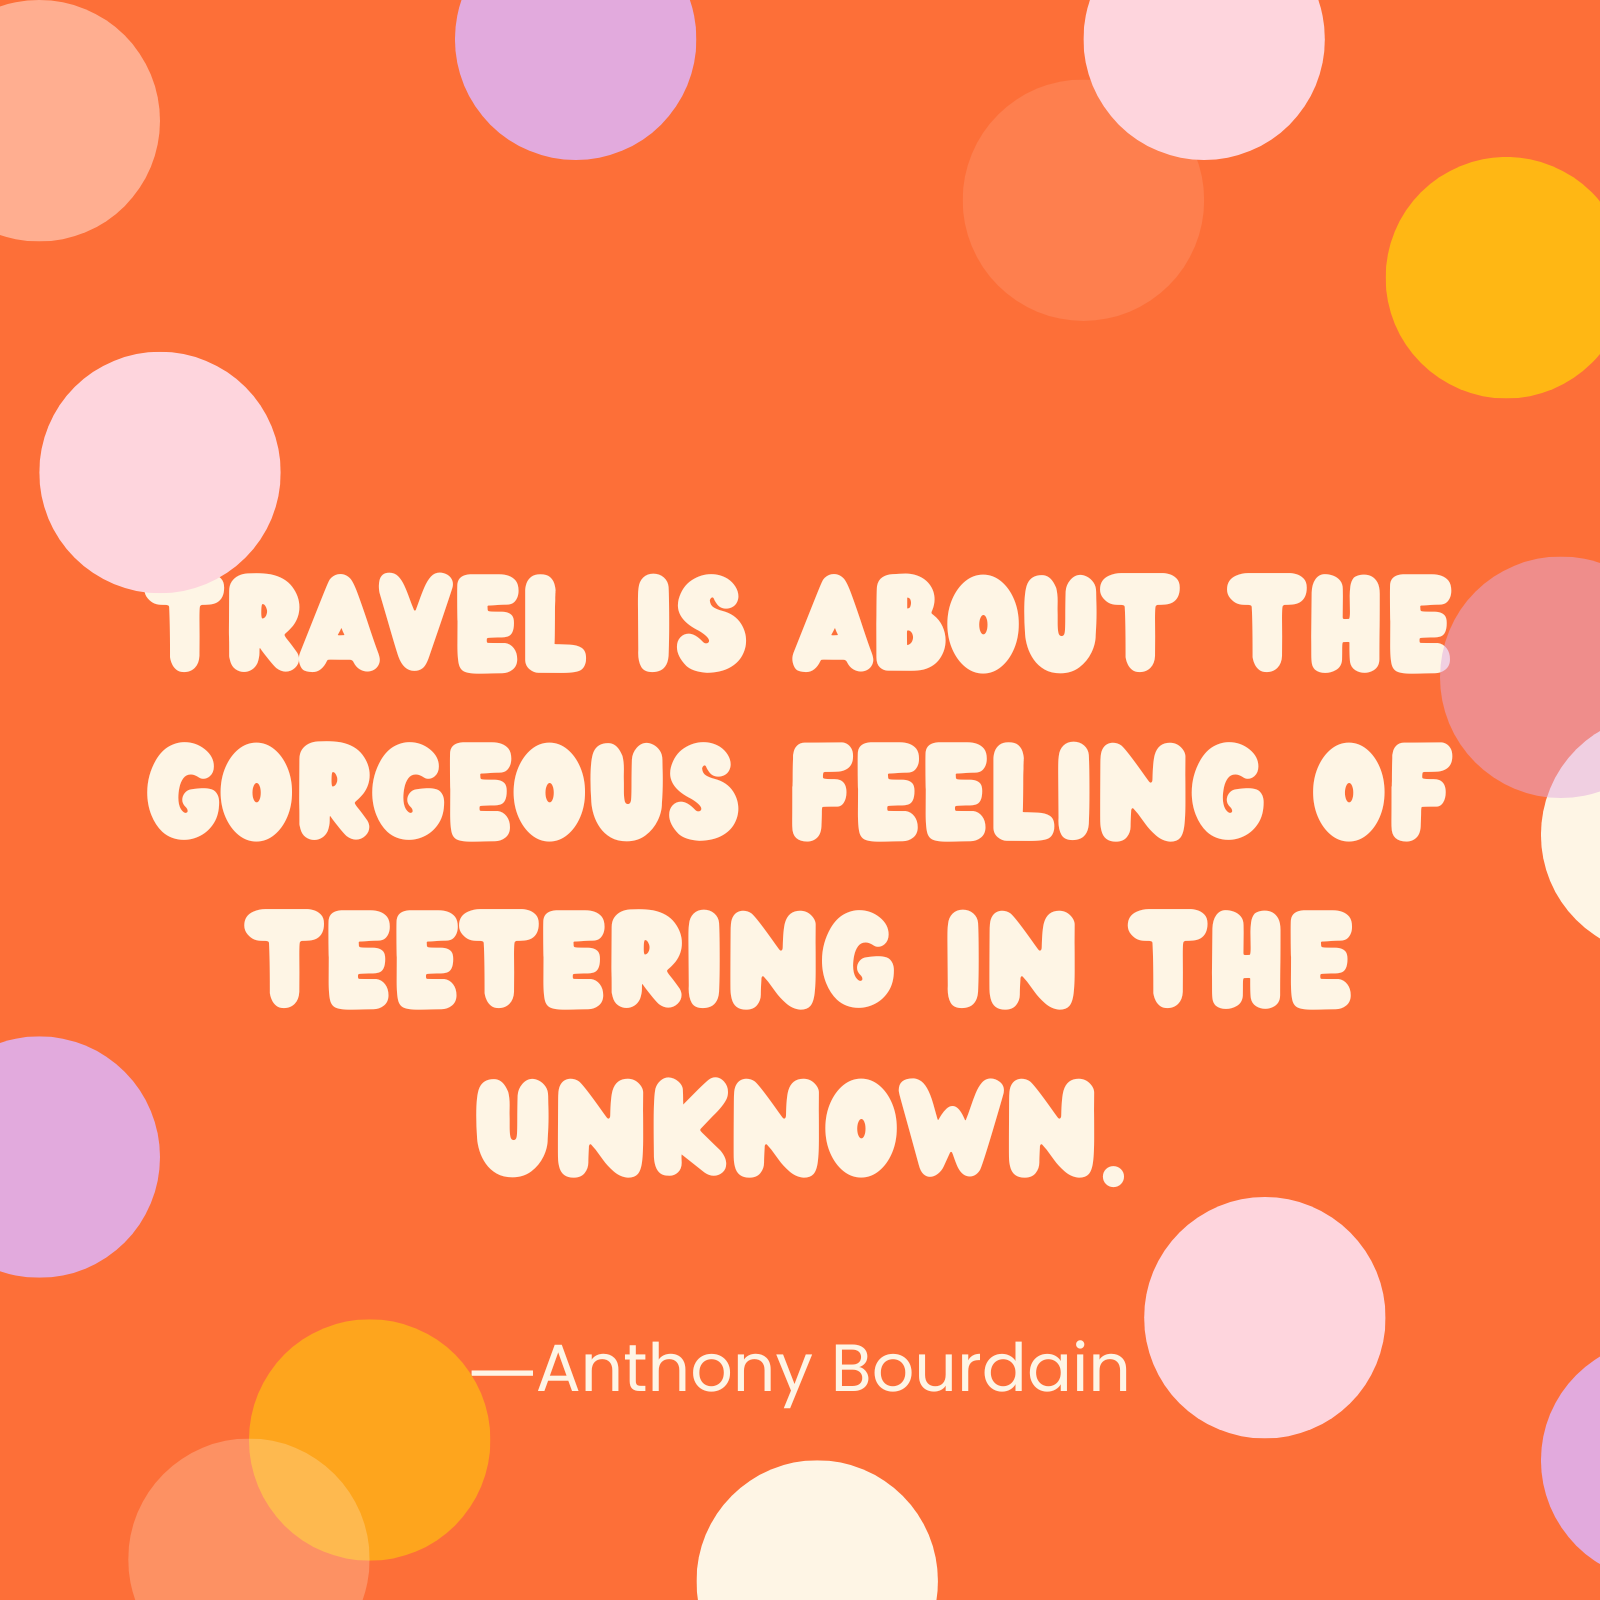 <p>"Travel is about the gorgeous feeling of teetering in the unknown." —Anthony Bourdain</p>